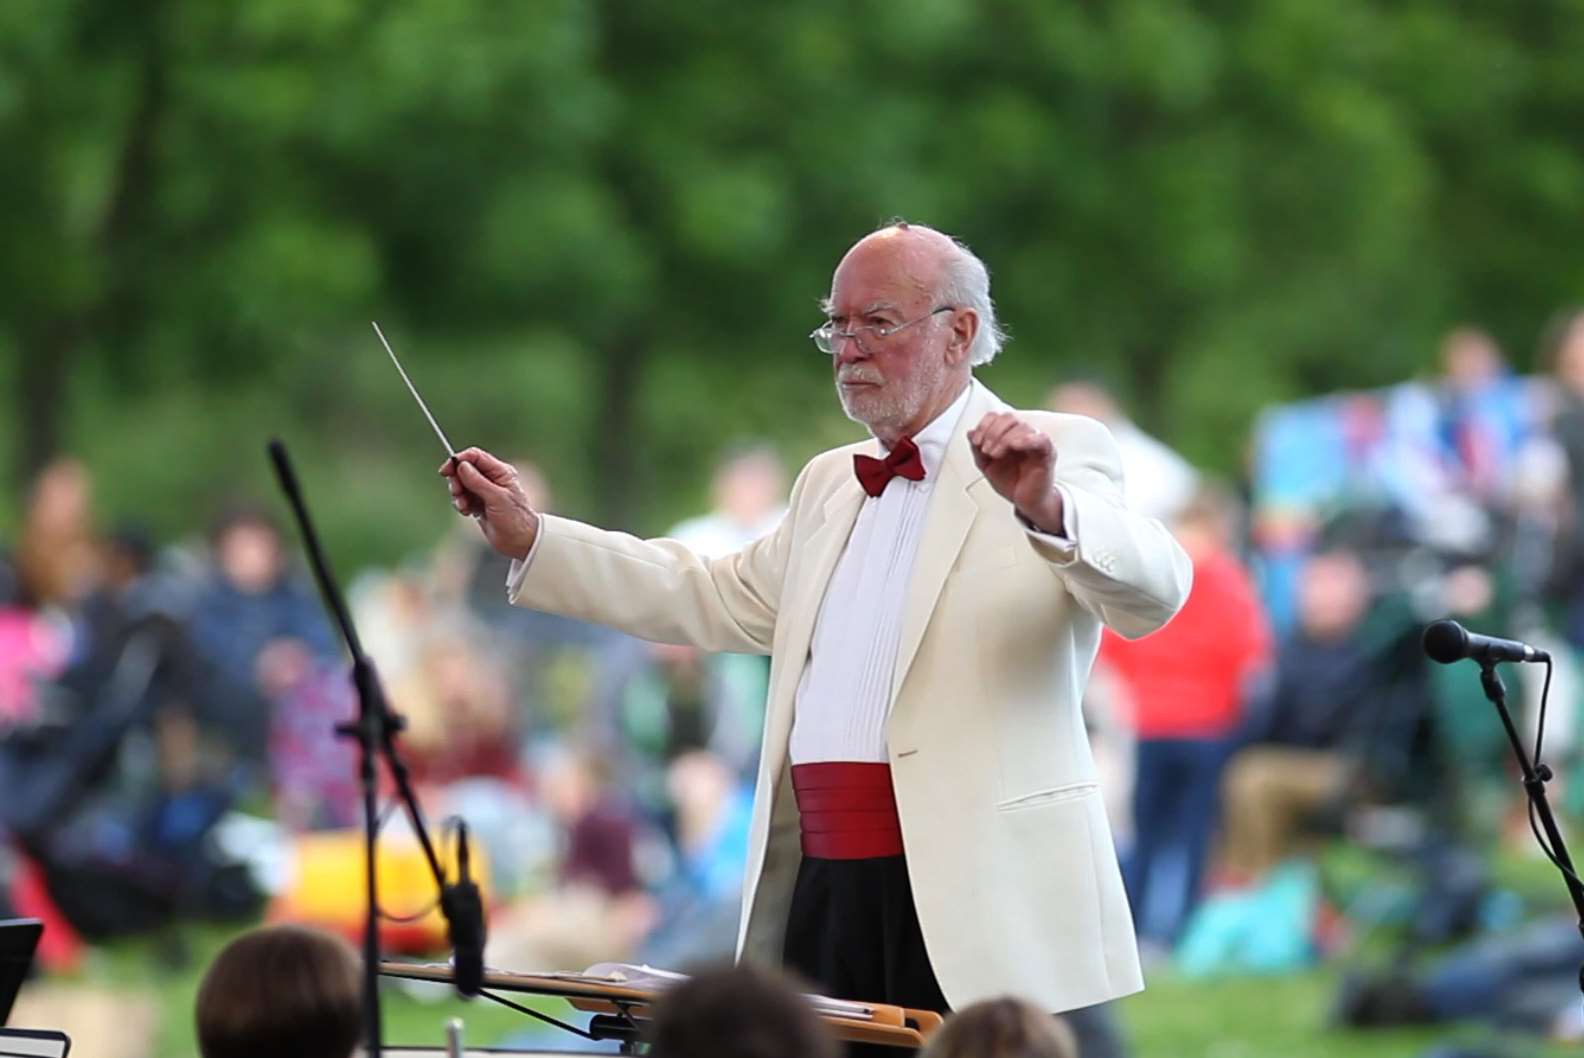 Jeffrey Vaughan Martin conducts at the Proms in the Park in Maidstone in 2015